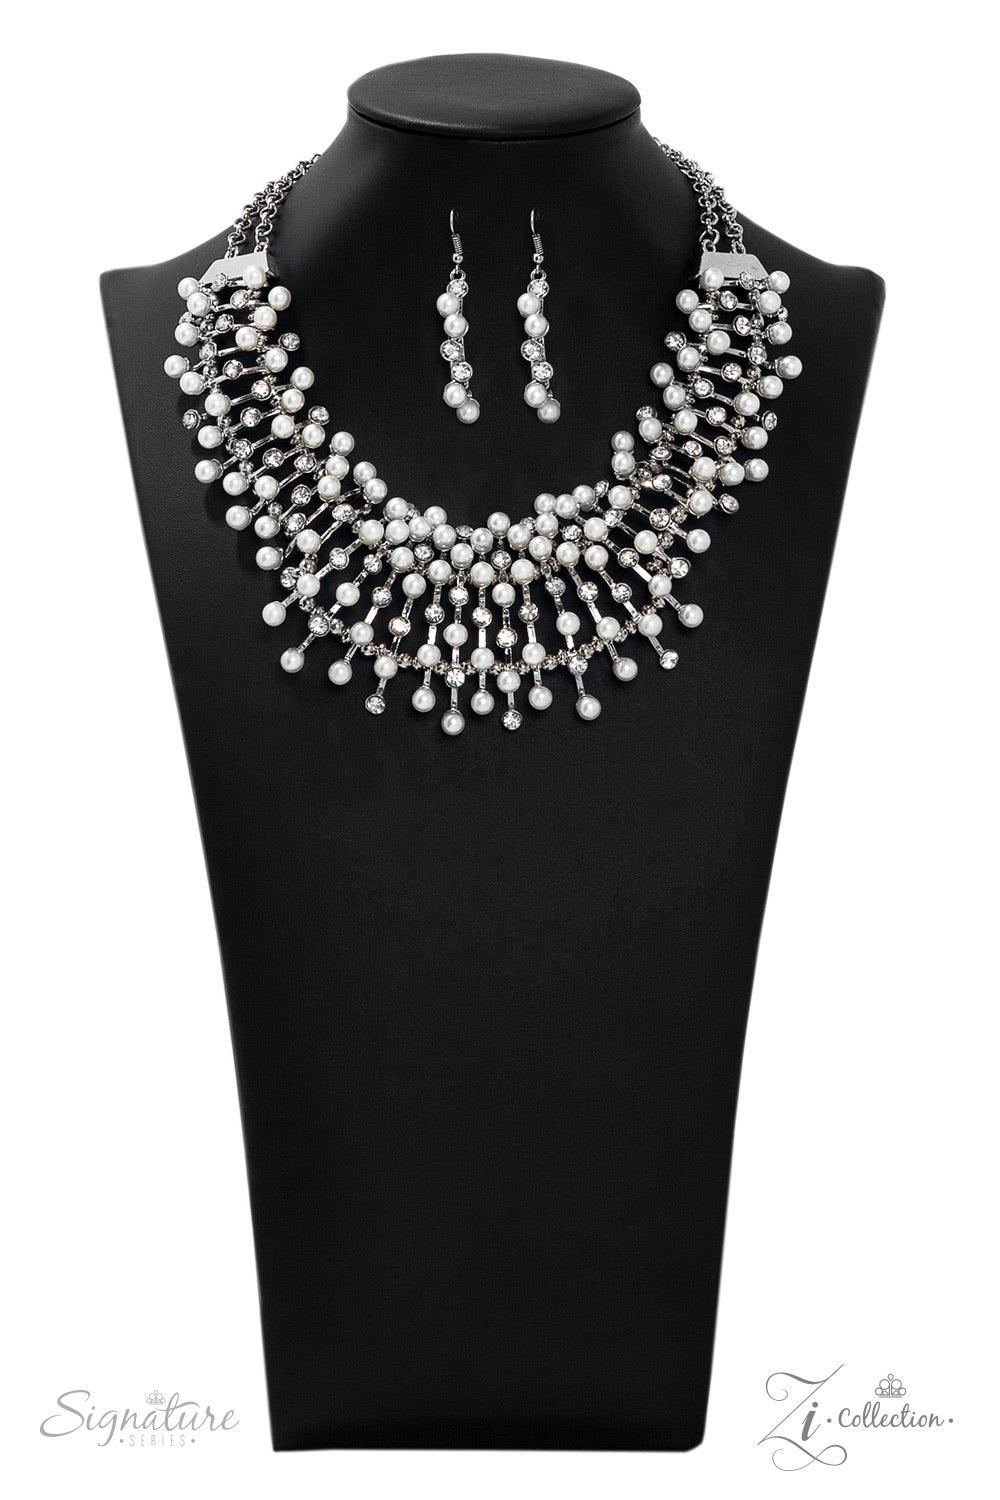 Paparazzi Accessories The Leanne 💗ZiCollection $25💗 A collection of sleek silver bars fans out along the collar in a regal display. Each bar is dotted in dainty white pearls and sparkling white rhinestones, resulting in a perfect mix of polished refinem